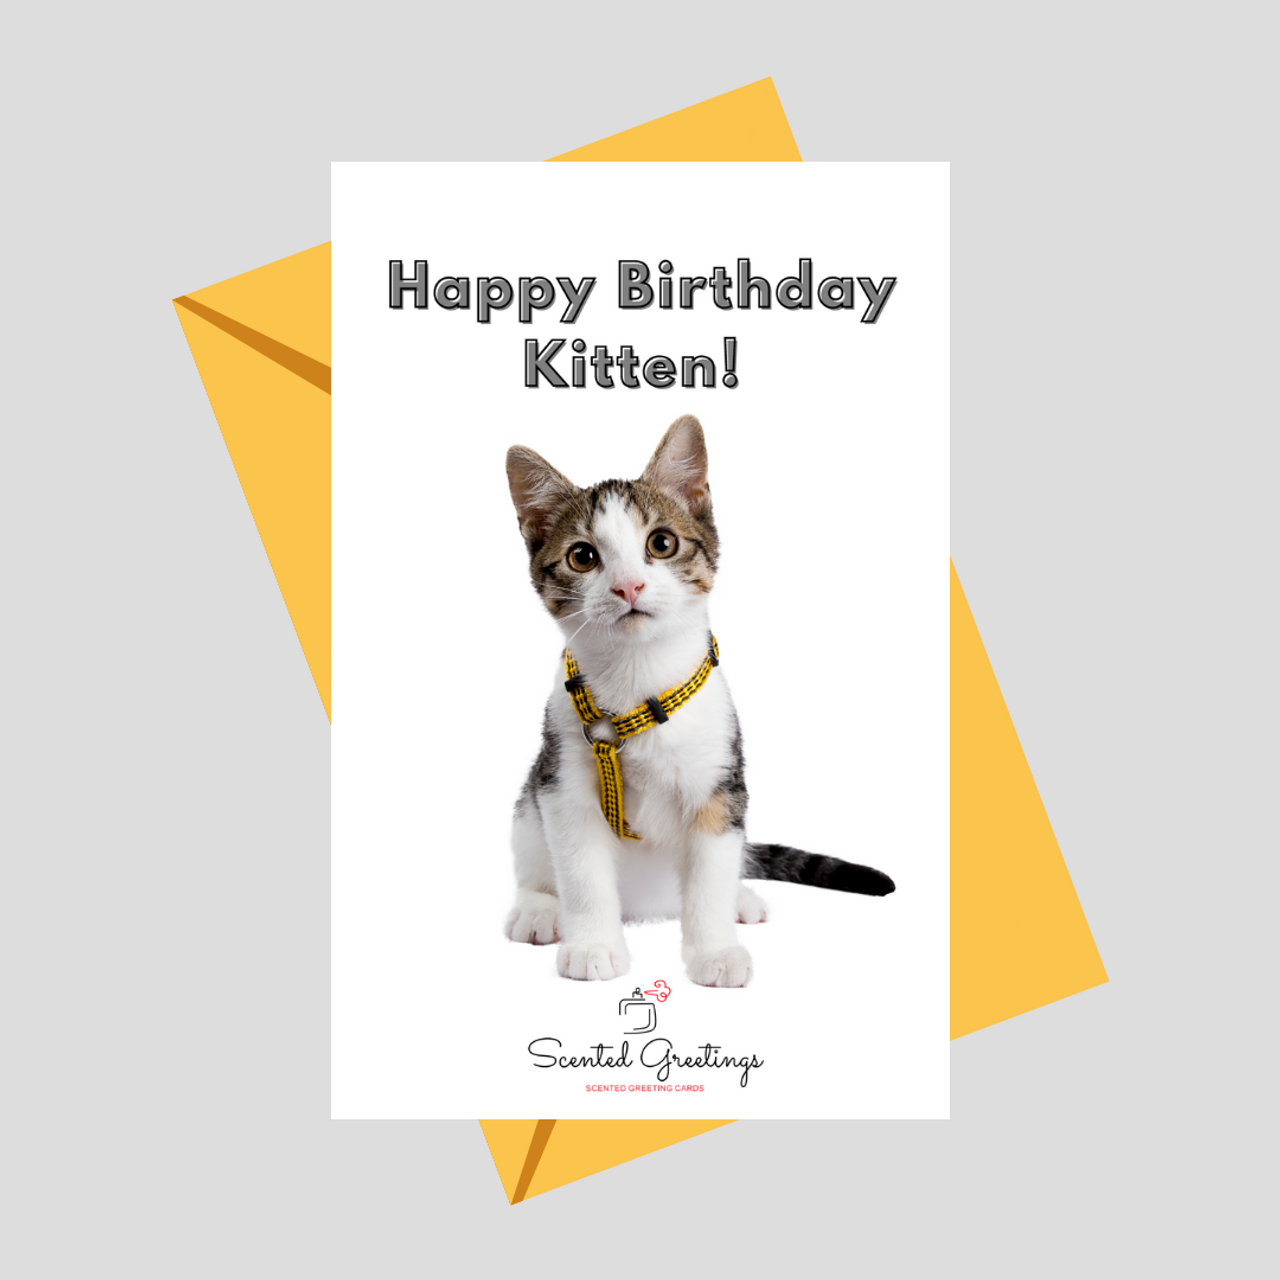 Happy Birthday Kittan! | Scented Greeting Cards - Bath Bombs | Best ...